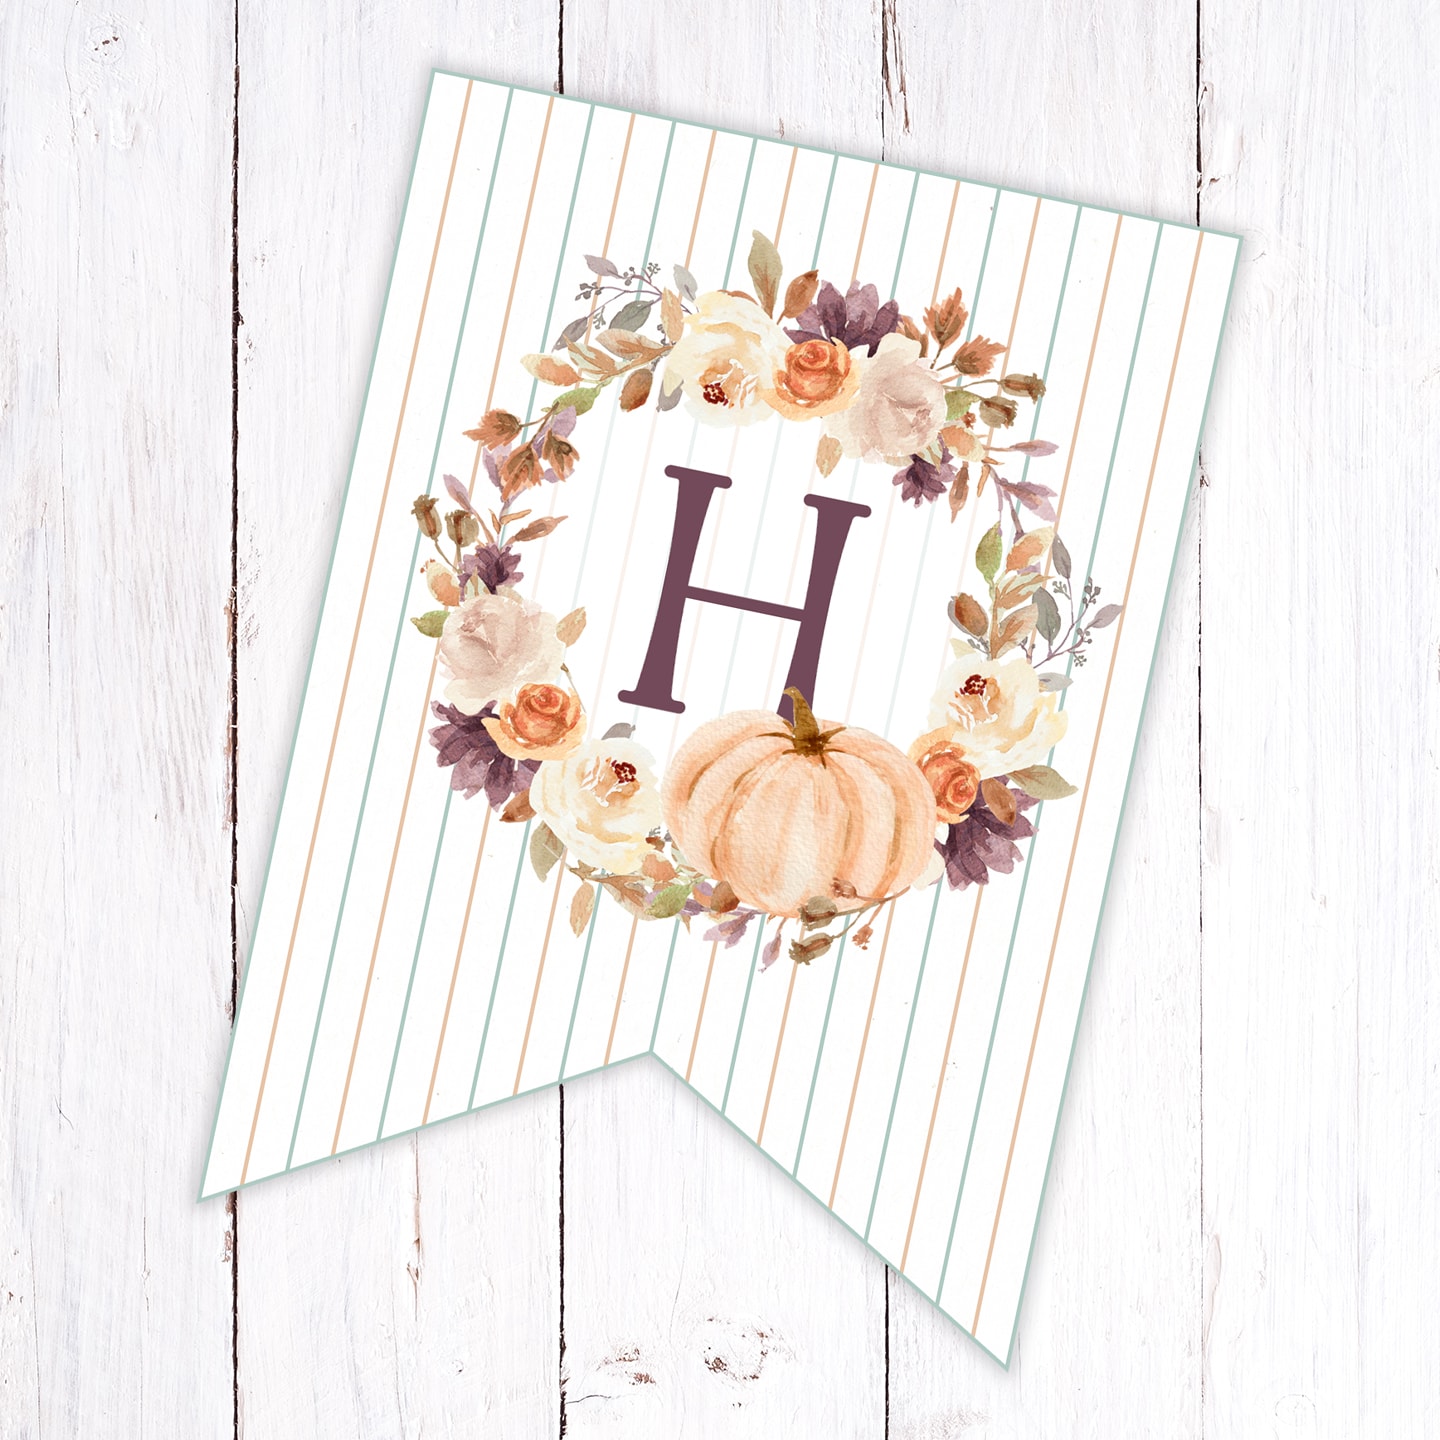 If you are looking for a little something special to add charm to your home this Thanksgiving Season, Why not make this beautiful Free Printable Farmhouse Happy Thanksgiving Banner!